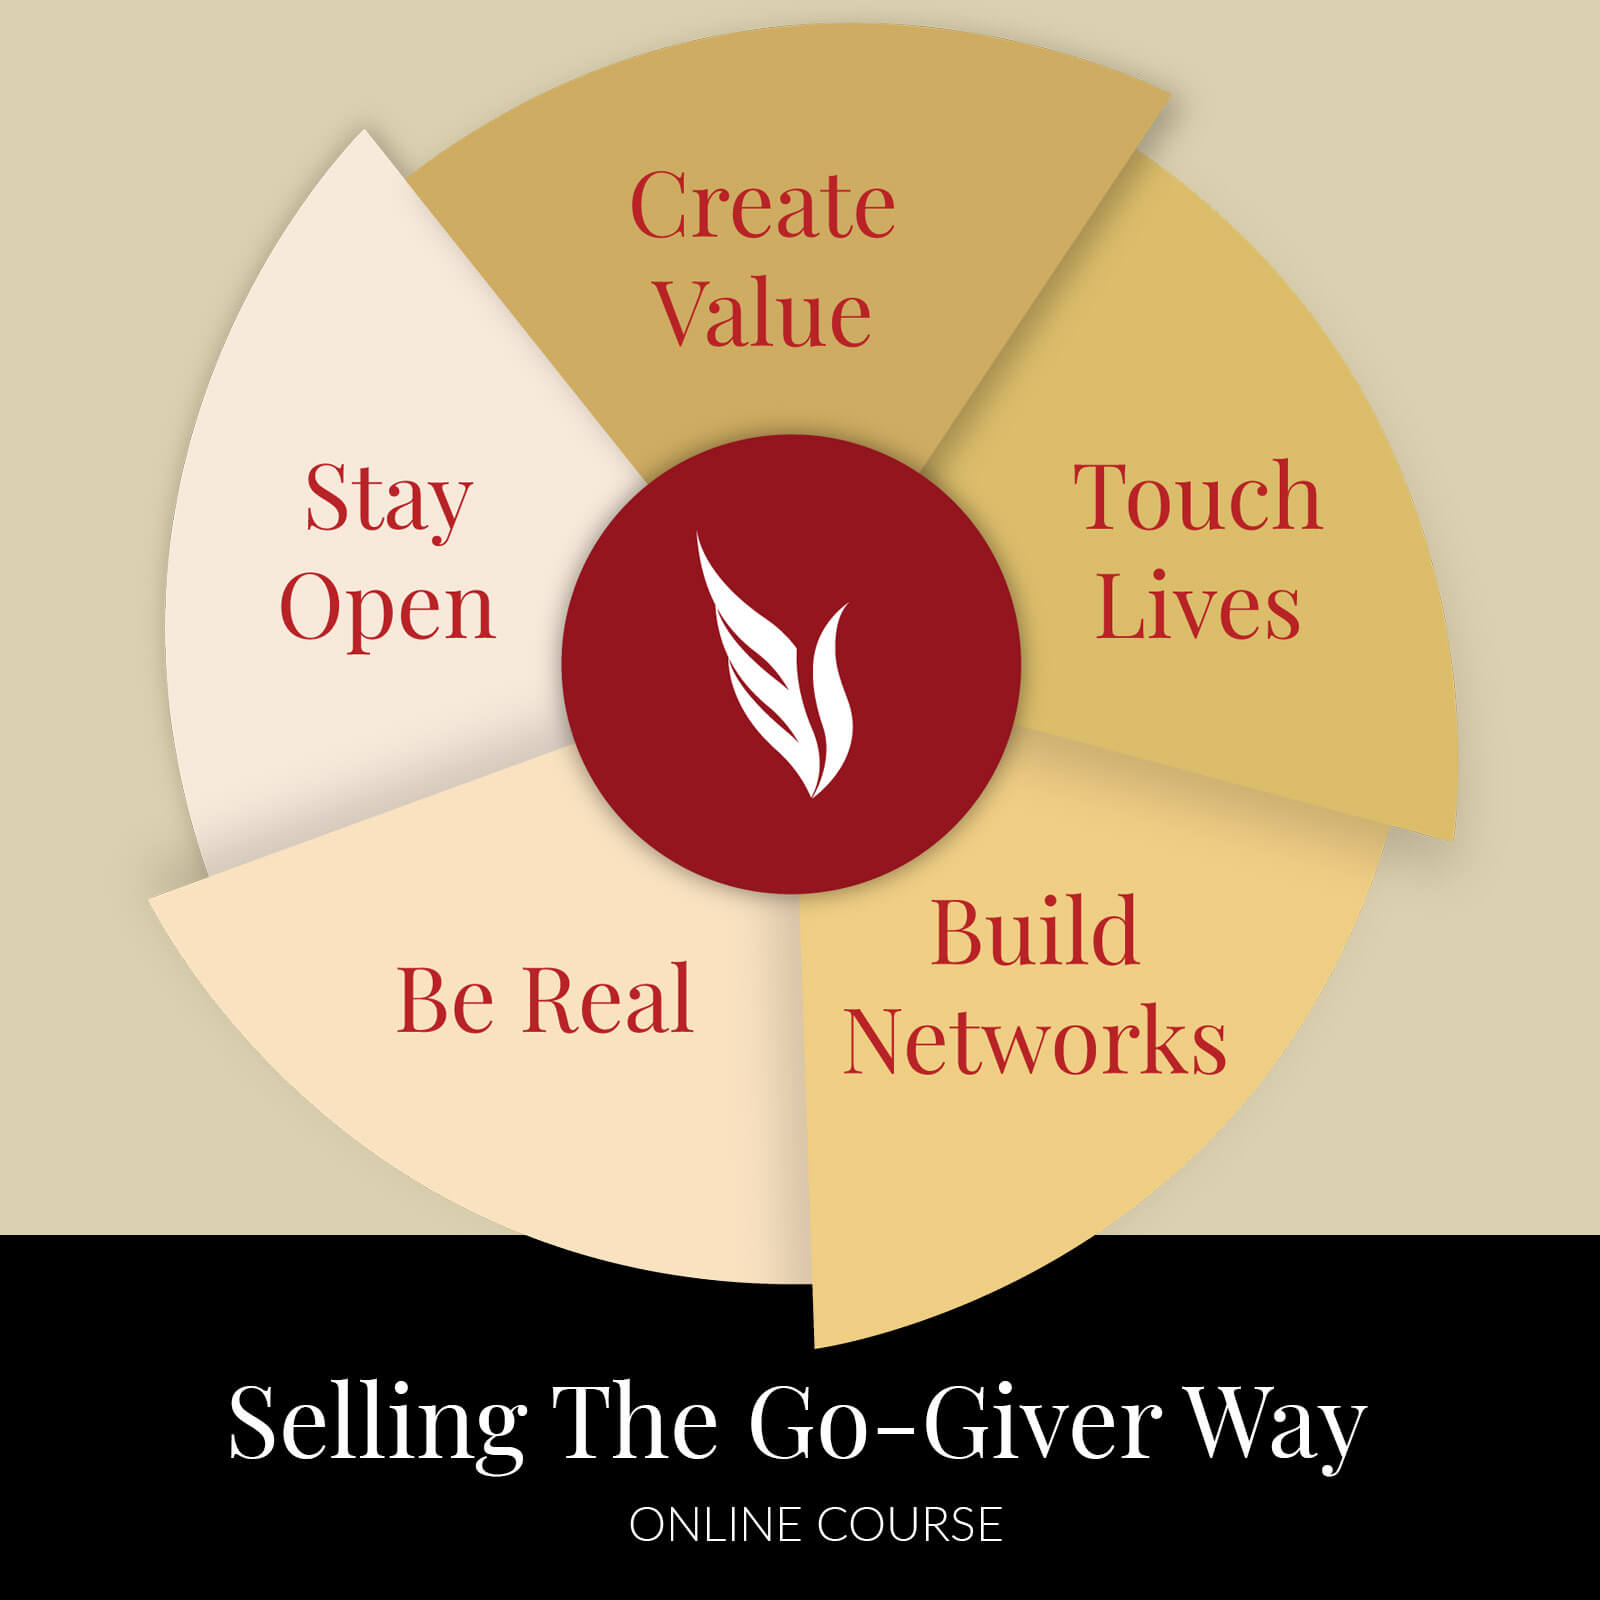 Selling The Go-Giver Way Online Course